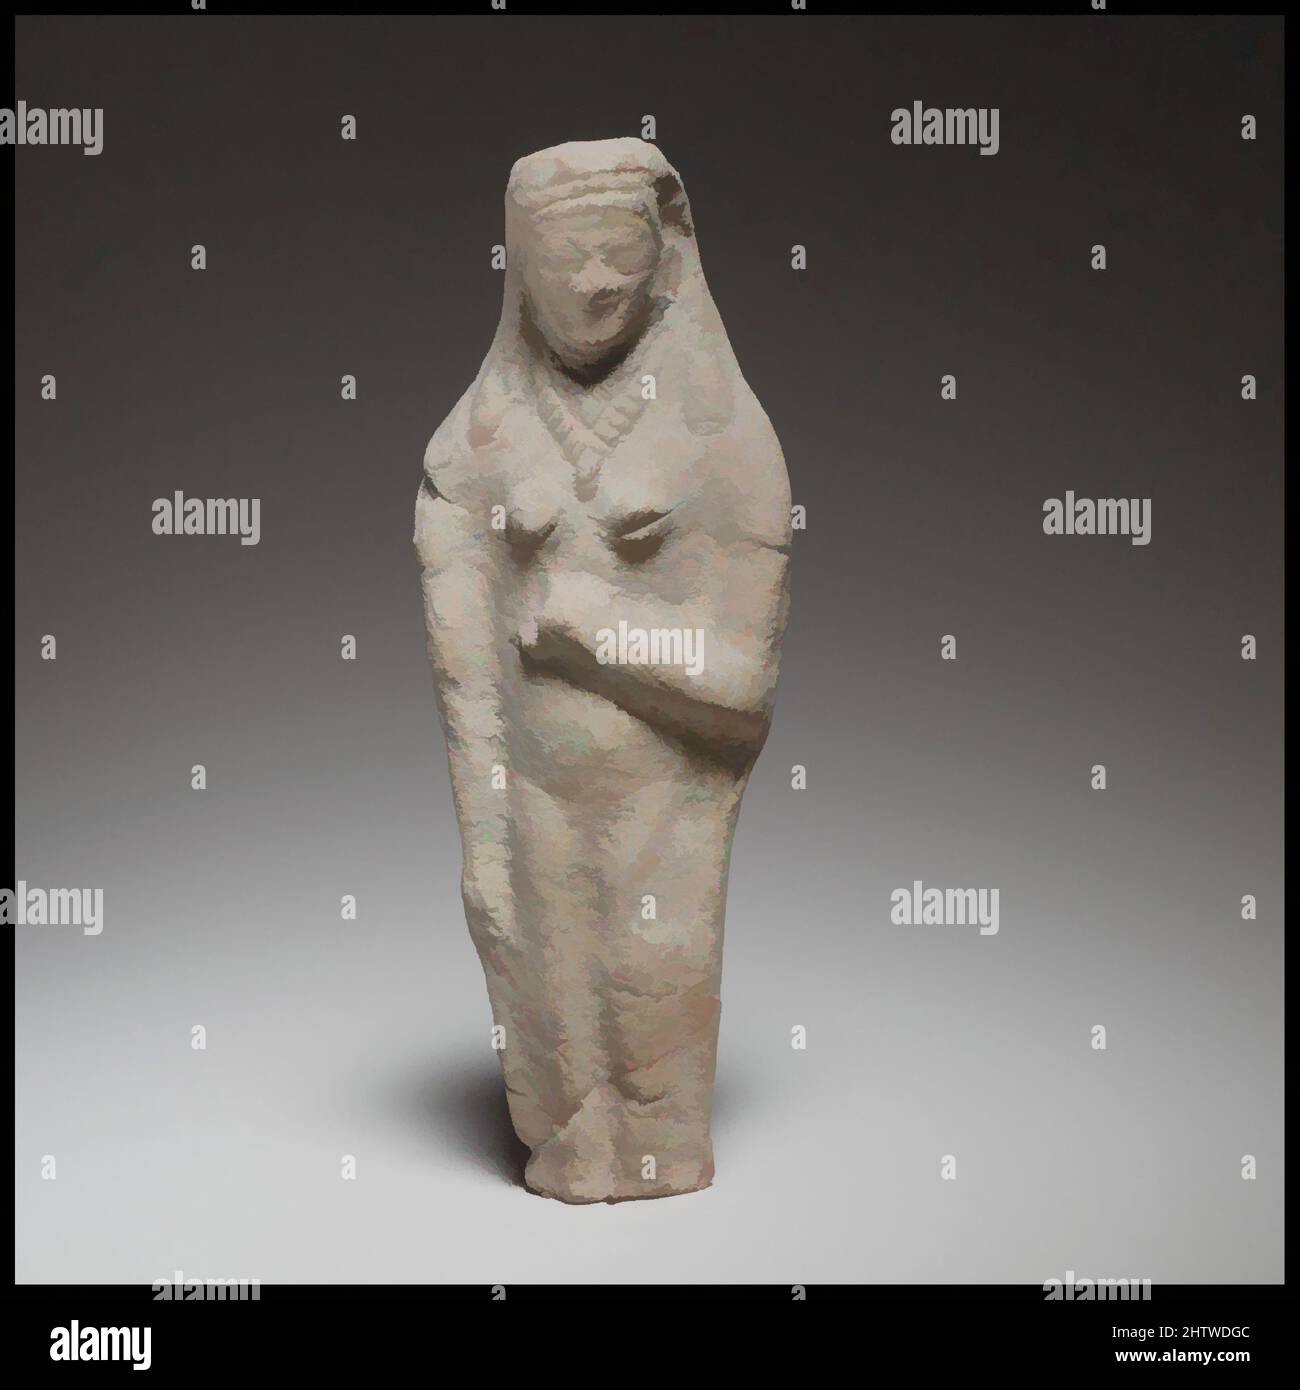 Art inspired by Standing female figurine, Cypro-Archaic II, ca. 600–480 B.C., Cypriot, Terracotta; mold-made, H. 6 1/16 in. (15.4 cm), Terracottas, The figurine is mold-made and solid, with a flat back. Her feet and left hand have broken off. The back of her head is oblique, Classic works modernized by Artotop with a splash of modernity. Shapes, color and value, eye-catching visual impact on art. Emotions through freedom of artworks in a contemporary way. A timeless message pursuing a wildly creative new direction. Artists turning to the digital medium and creating the Artotop NFT Stock Photo